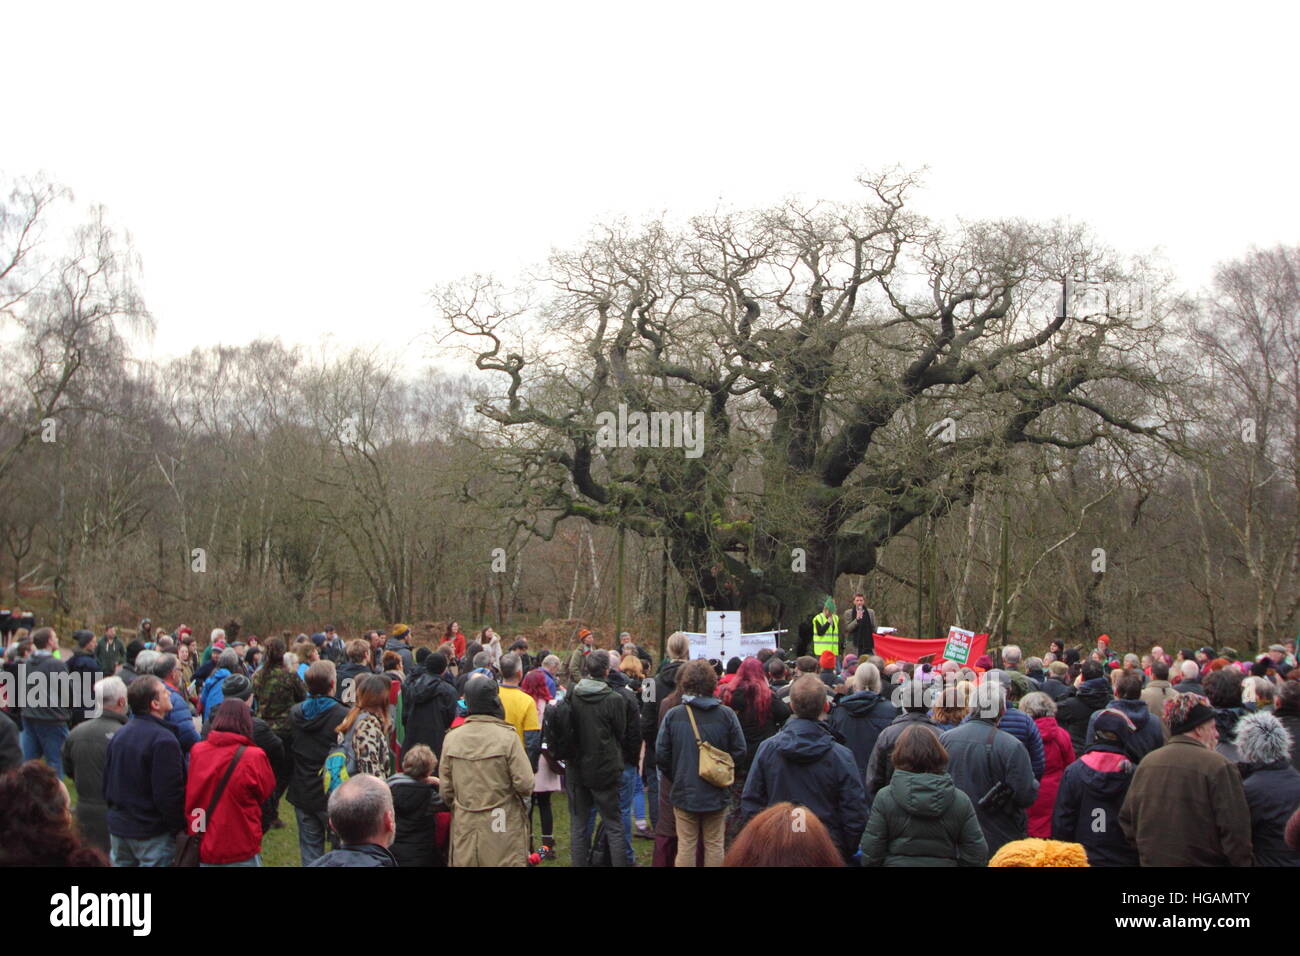 Sherwood Forest, Nottinghamshire, UK. 7 January 2017. Demonstrators protest against potential fracking in Sherwood Forest, Nottinghamshire after Friends of the Earth revealed chemicals firm, INEOS is to carry out seismic imaging surveys in this former medieval hunting forest including near to the iconic Major Oak (pictured). Green campaigners fear this could lead to the search for shale gas in the legendary home of heroic outlaw, Robin Hood. INEOS Shale says it is not fracking in Sherwood Forest. Credit: Deborah Vernon/Alamy Live News Stock Photo